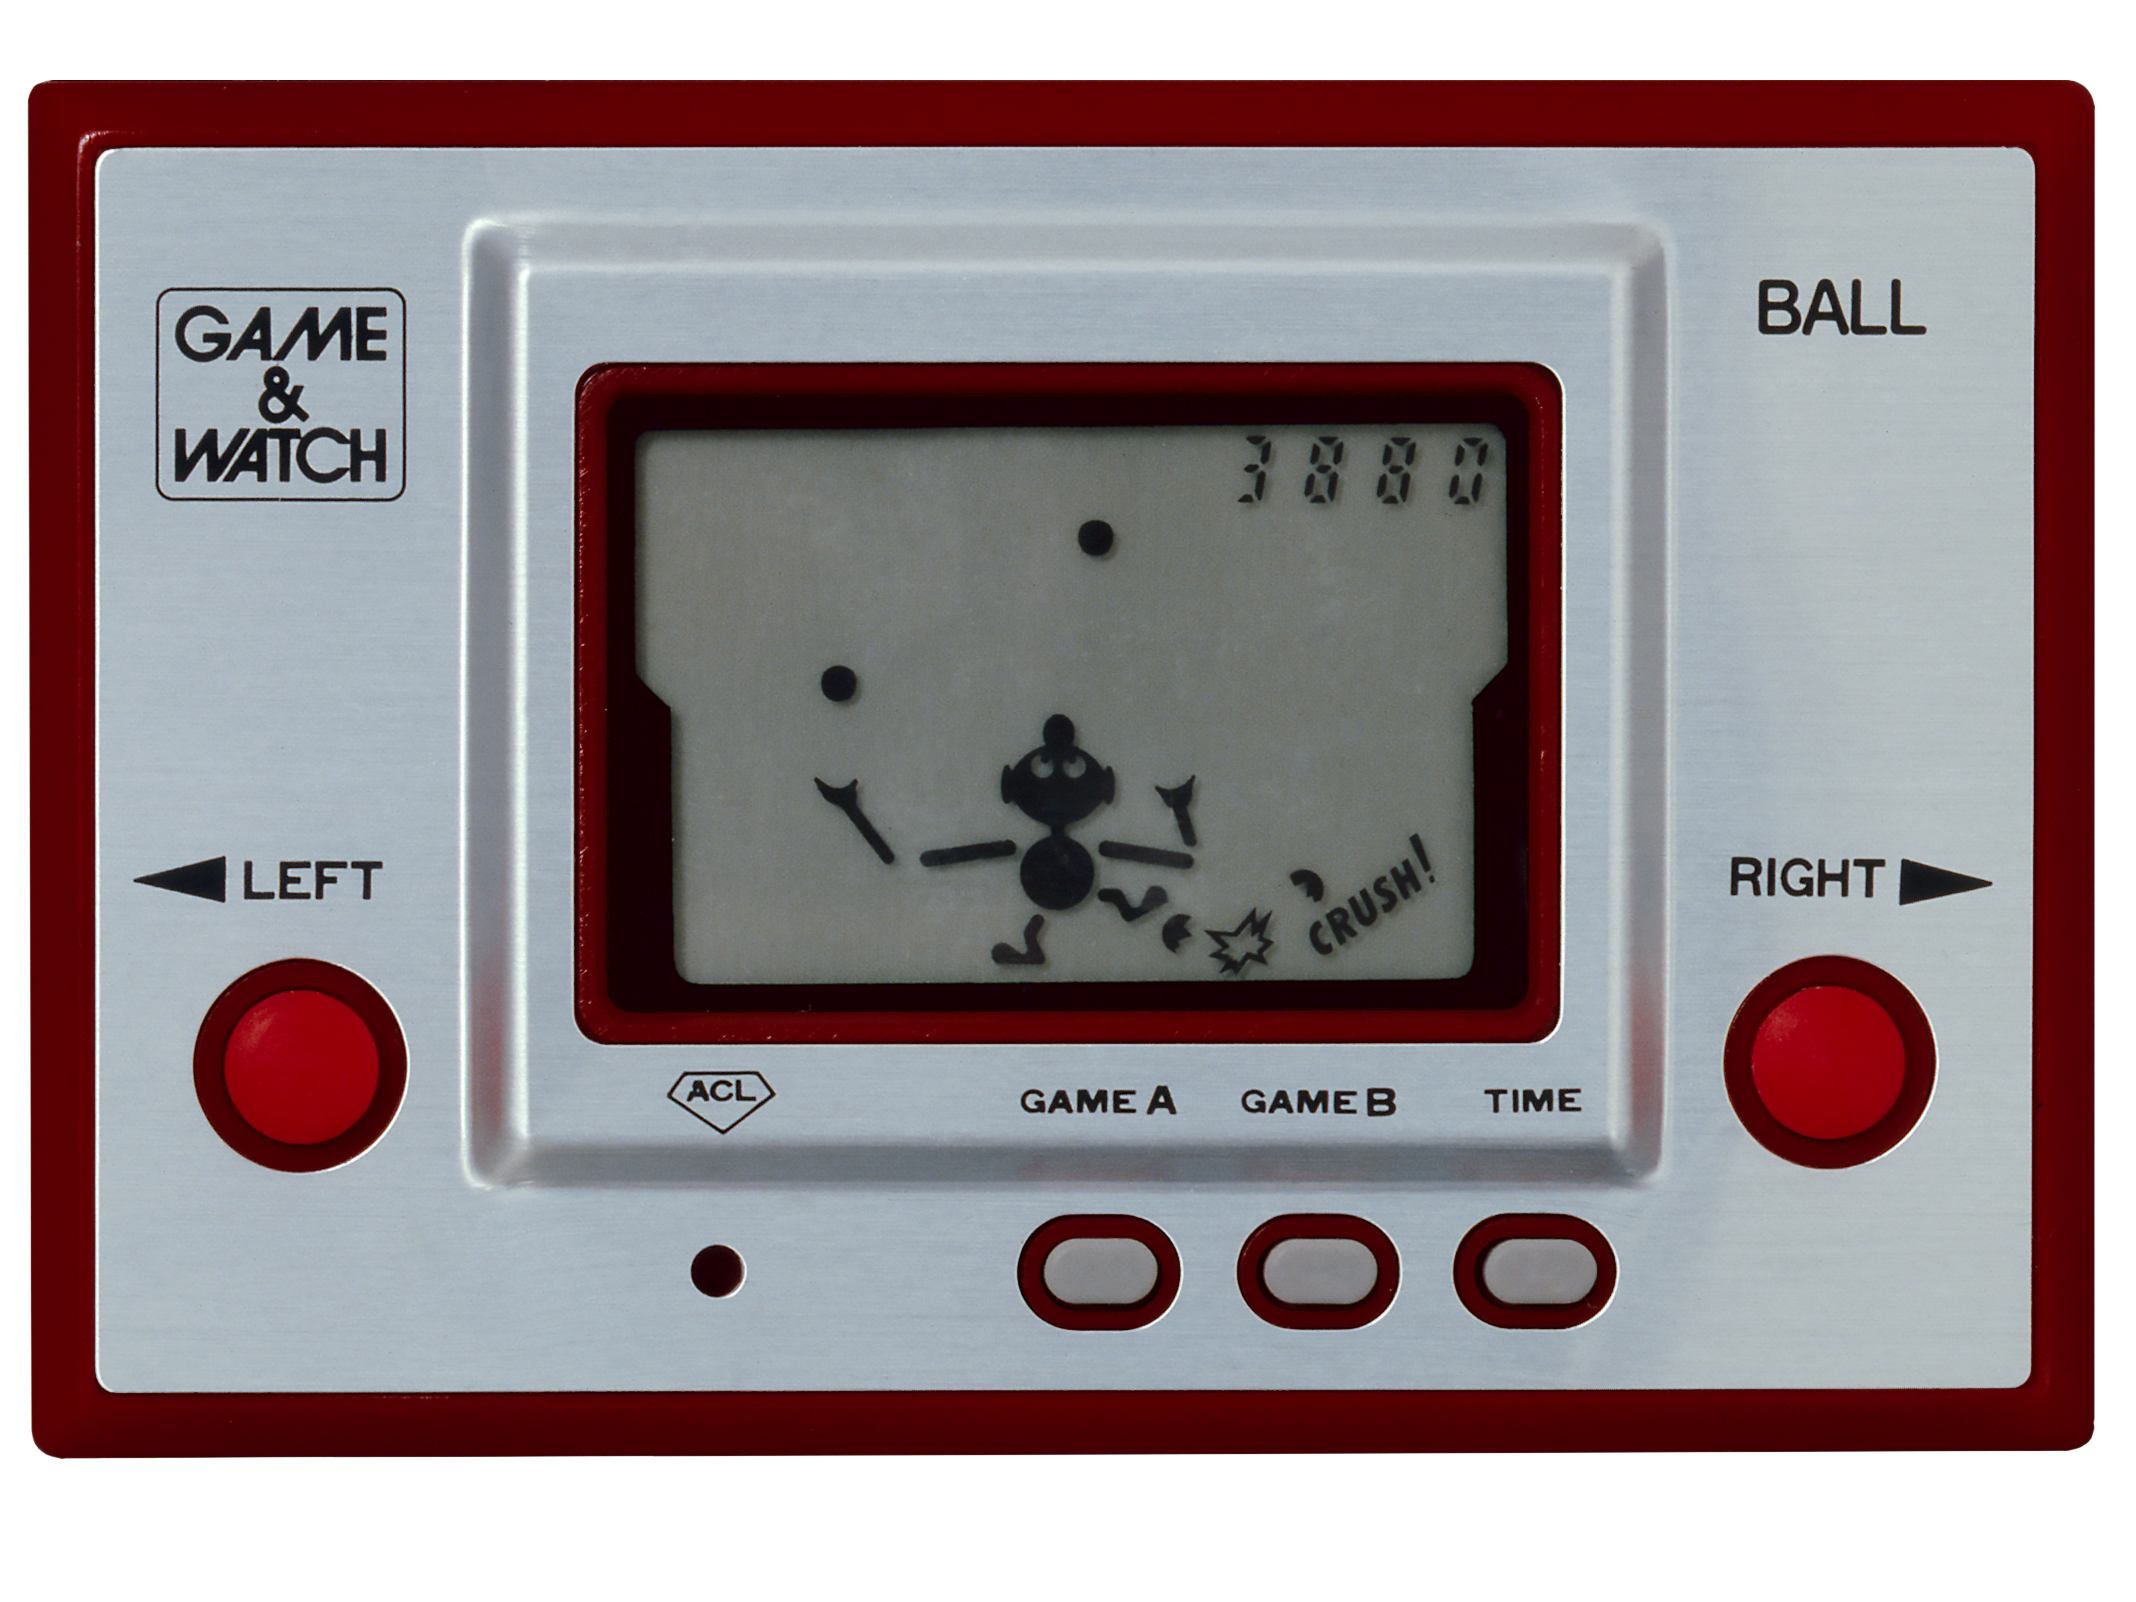 Watch this game. Нинтендо game and watch. Nintendo game and watch 1980. 1980 Нинтендо game watch. Nintendo game & watch game.